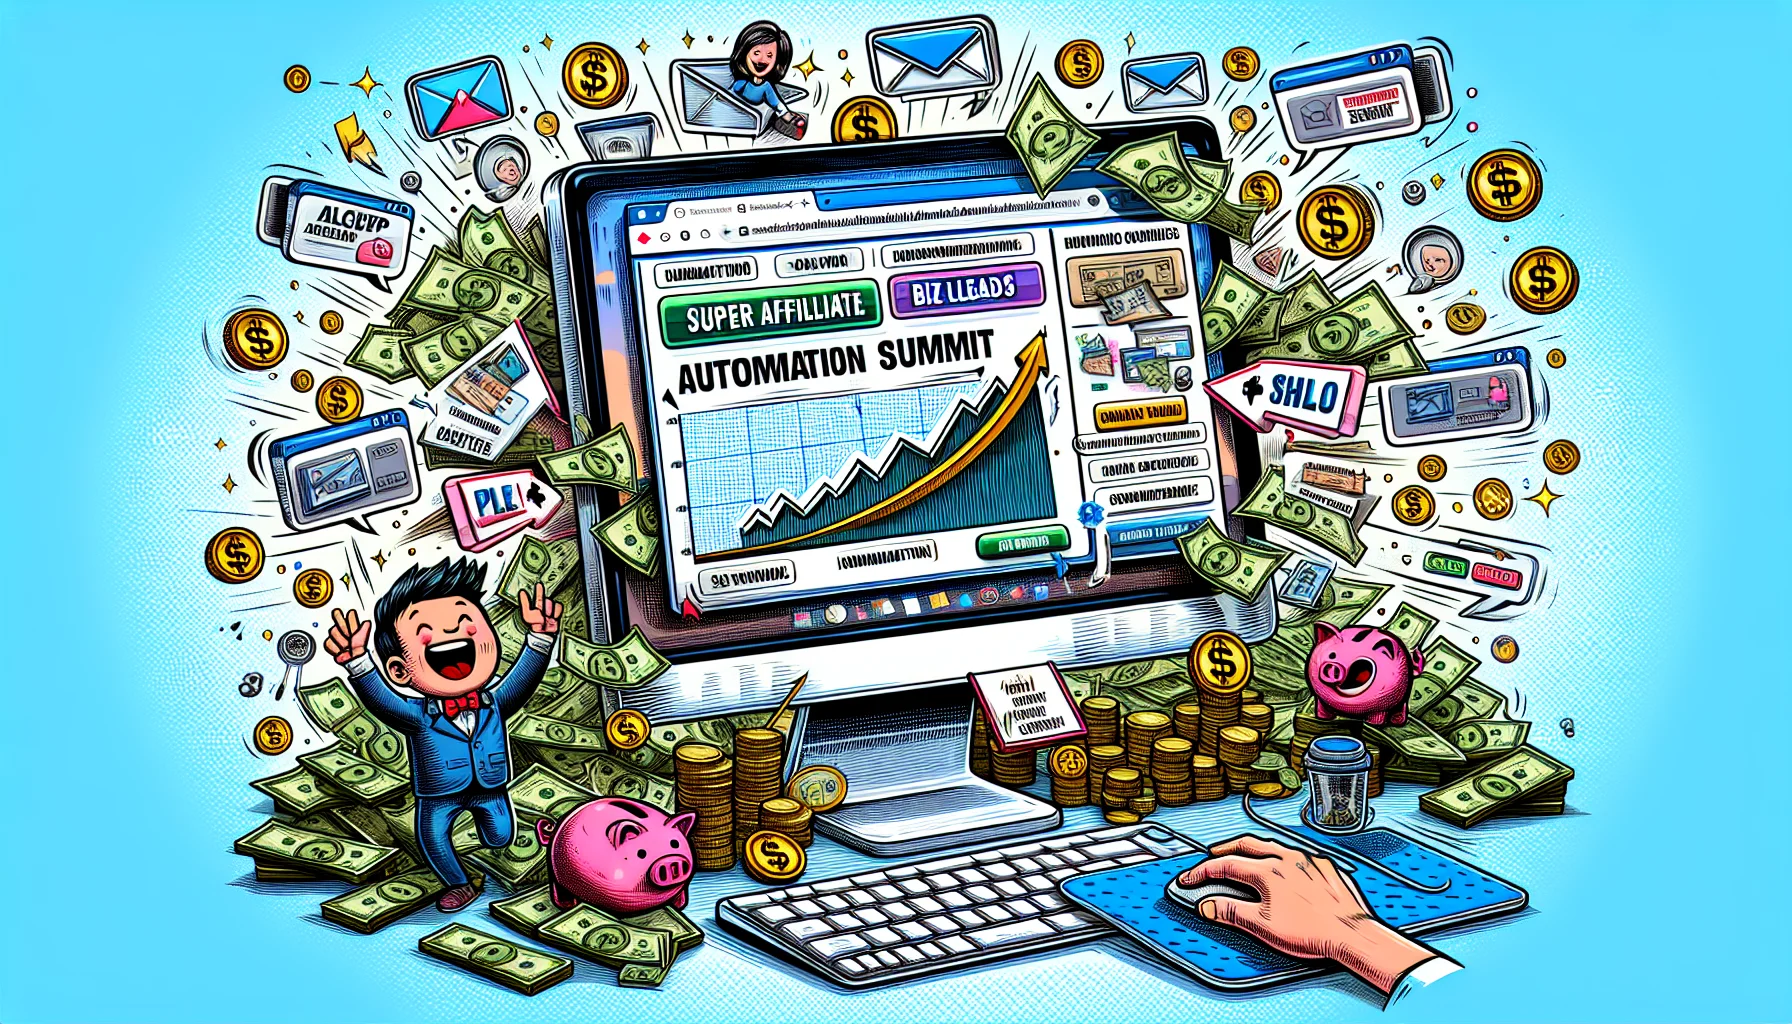 Create a humorous and realistic scenario of a website called 'Super Affiliate BizLeads Automation Summit'. The visual would exhibit an enticing money-making online event. Perhaps show a computer screen displaying an elaborate graphical representation of the website, cluttered with pop-up notifications showing varying amounts of dollars and Bitcoins. Next to the computer, consider illustrating an excited user excitedly clicking away, indicating a sense of anticipation. Surround the entire scenario with iconography common in online business forums, assets like upward growth graphs, mouse pointers, click buttons, email envelopes, and small piggy banks.